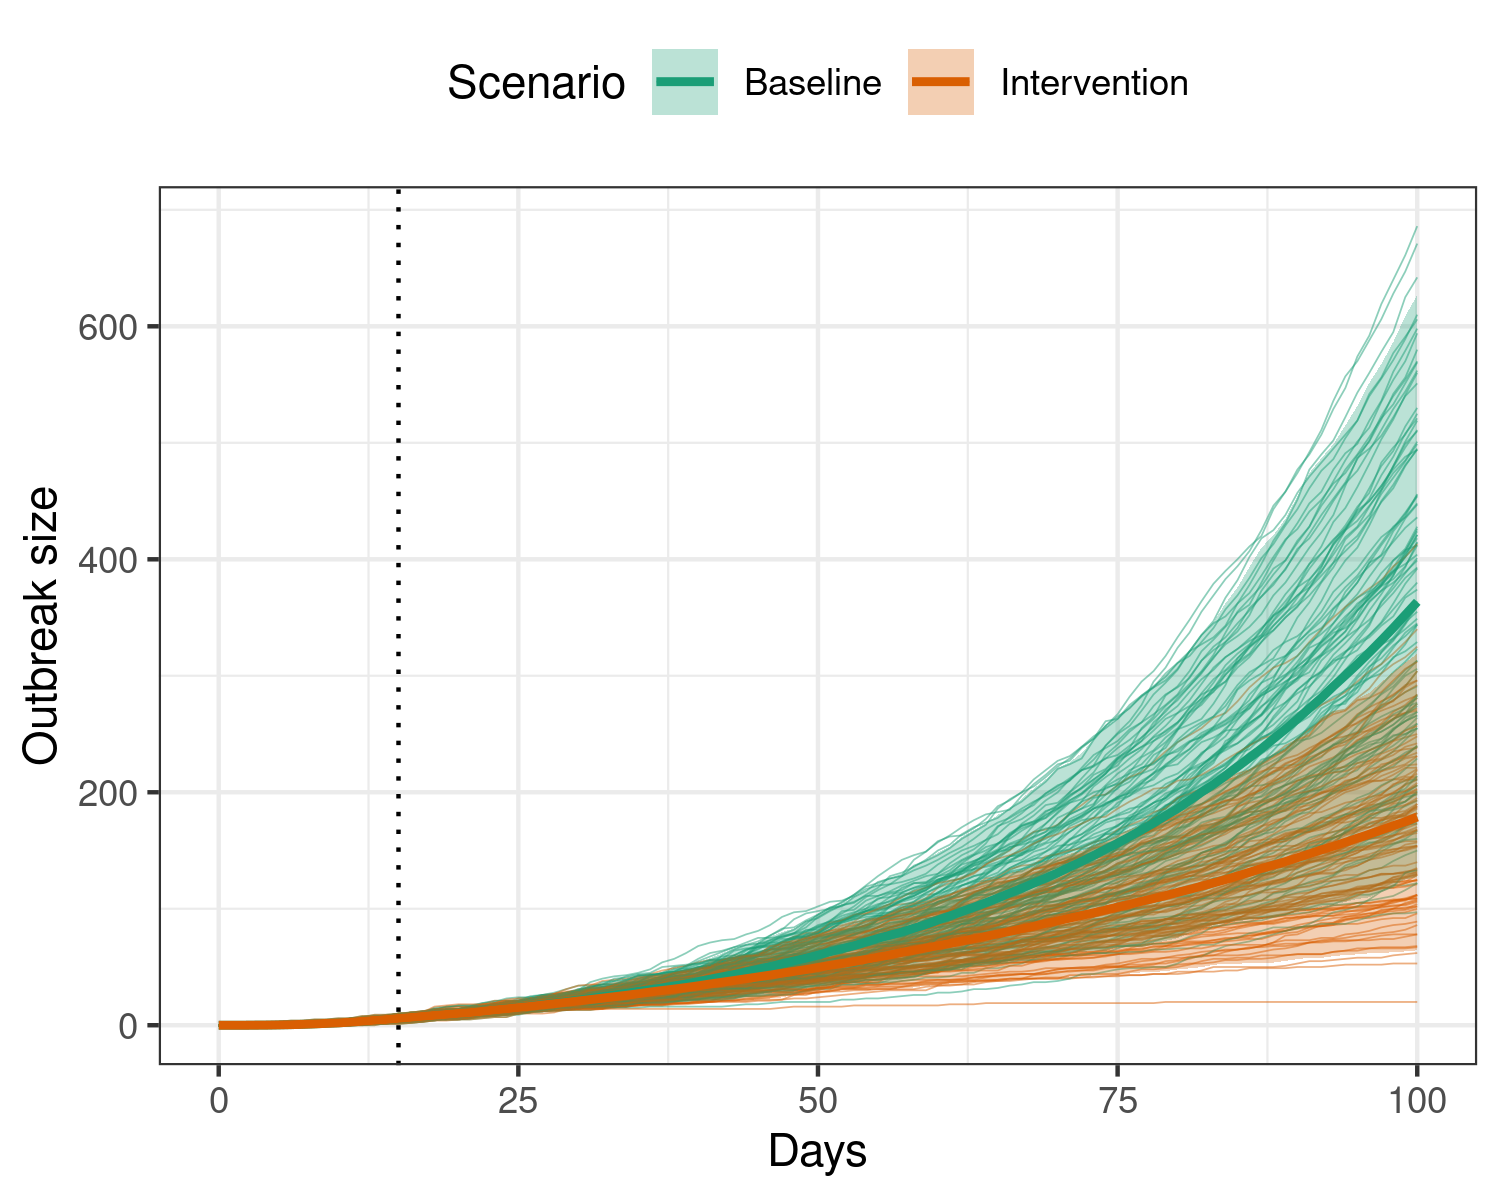 Effect of implementing an intervention that reduces transmission by 20% during an ebola outbreak. The intervention begins on the 15th day (dotted vertical line), and is active for the remainder of the model duration. Applying this intervention leads to many fewer individuals infectious with ebola over the outbreak.